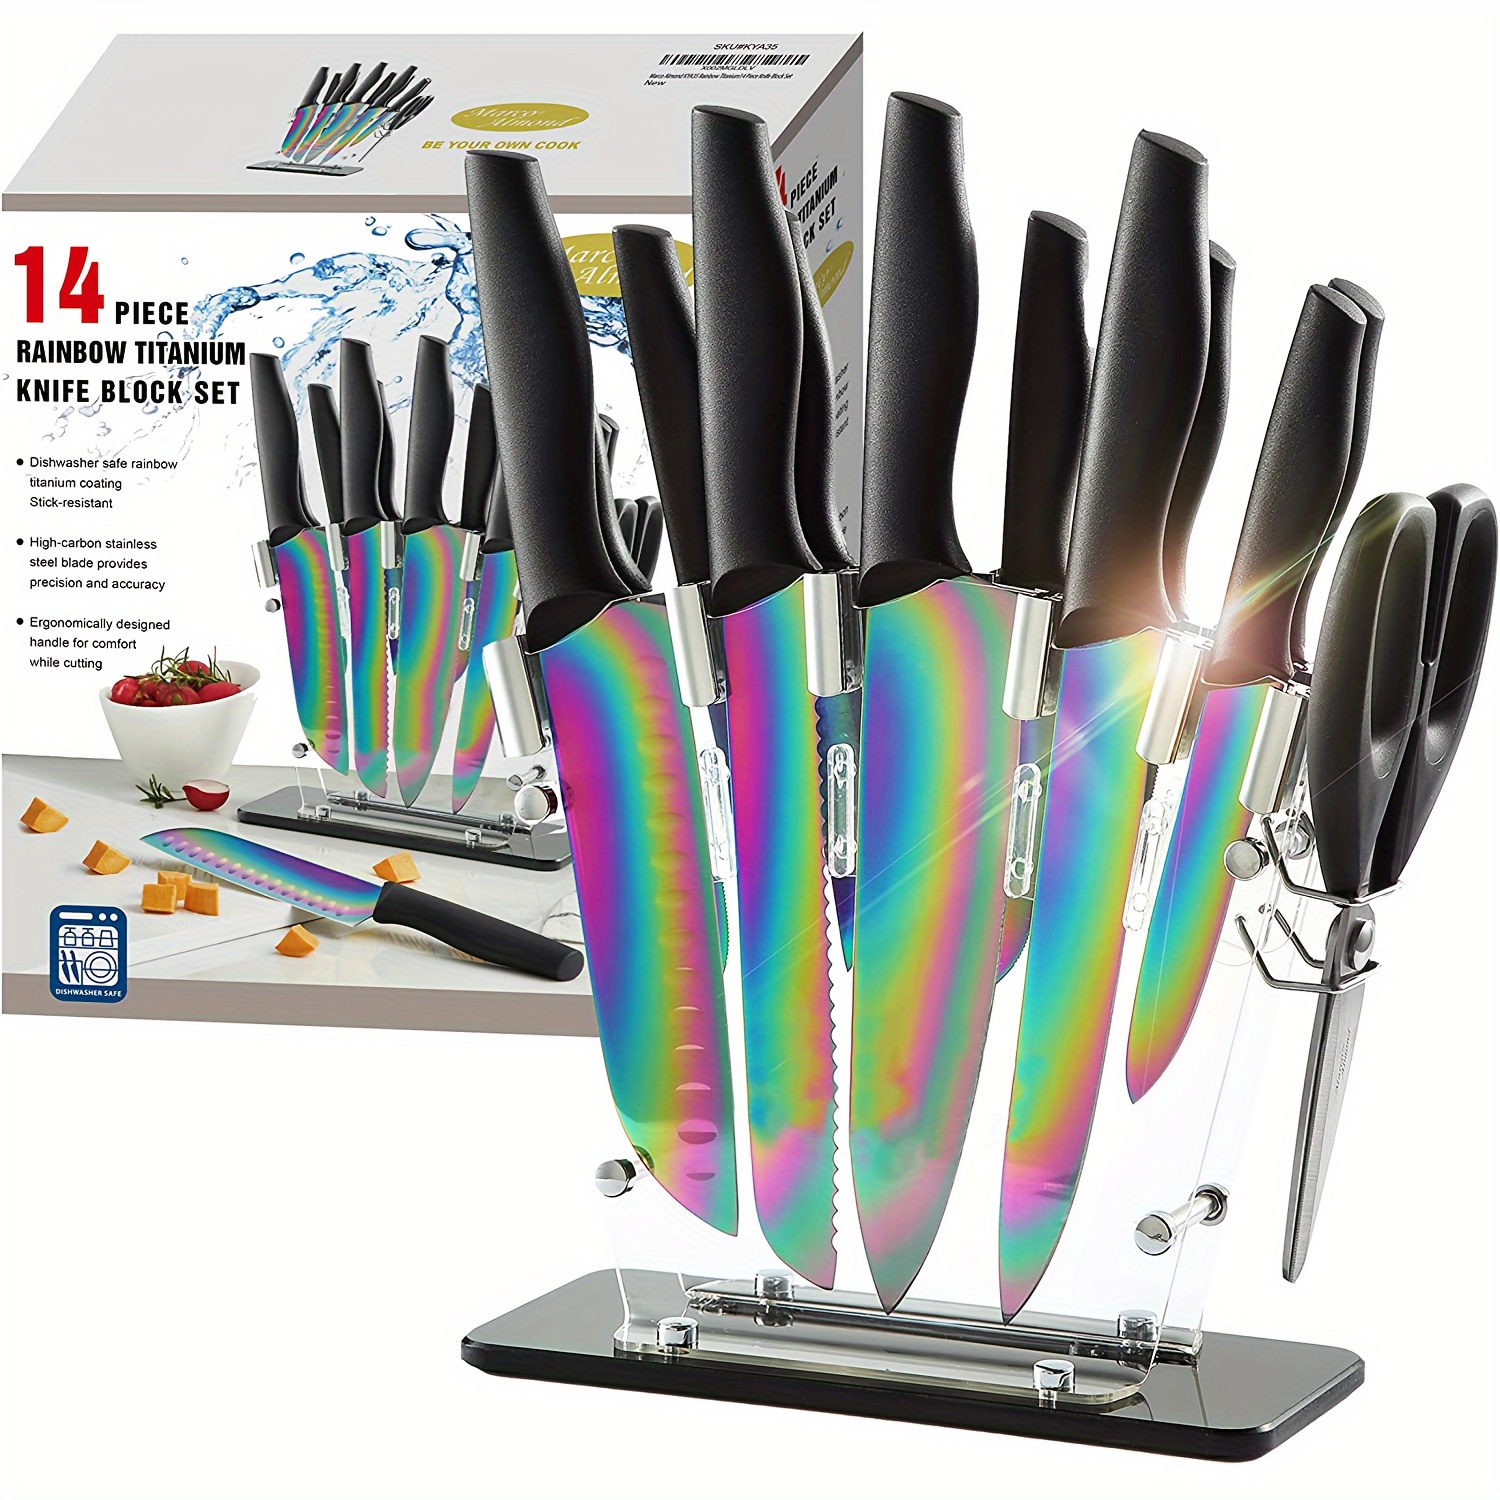 

Rainbow Knife Set, Titanium Coating For Anti-rusting, Super Sharp Cutlery Knife Set With Acrylic Stand, Stainless Steel